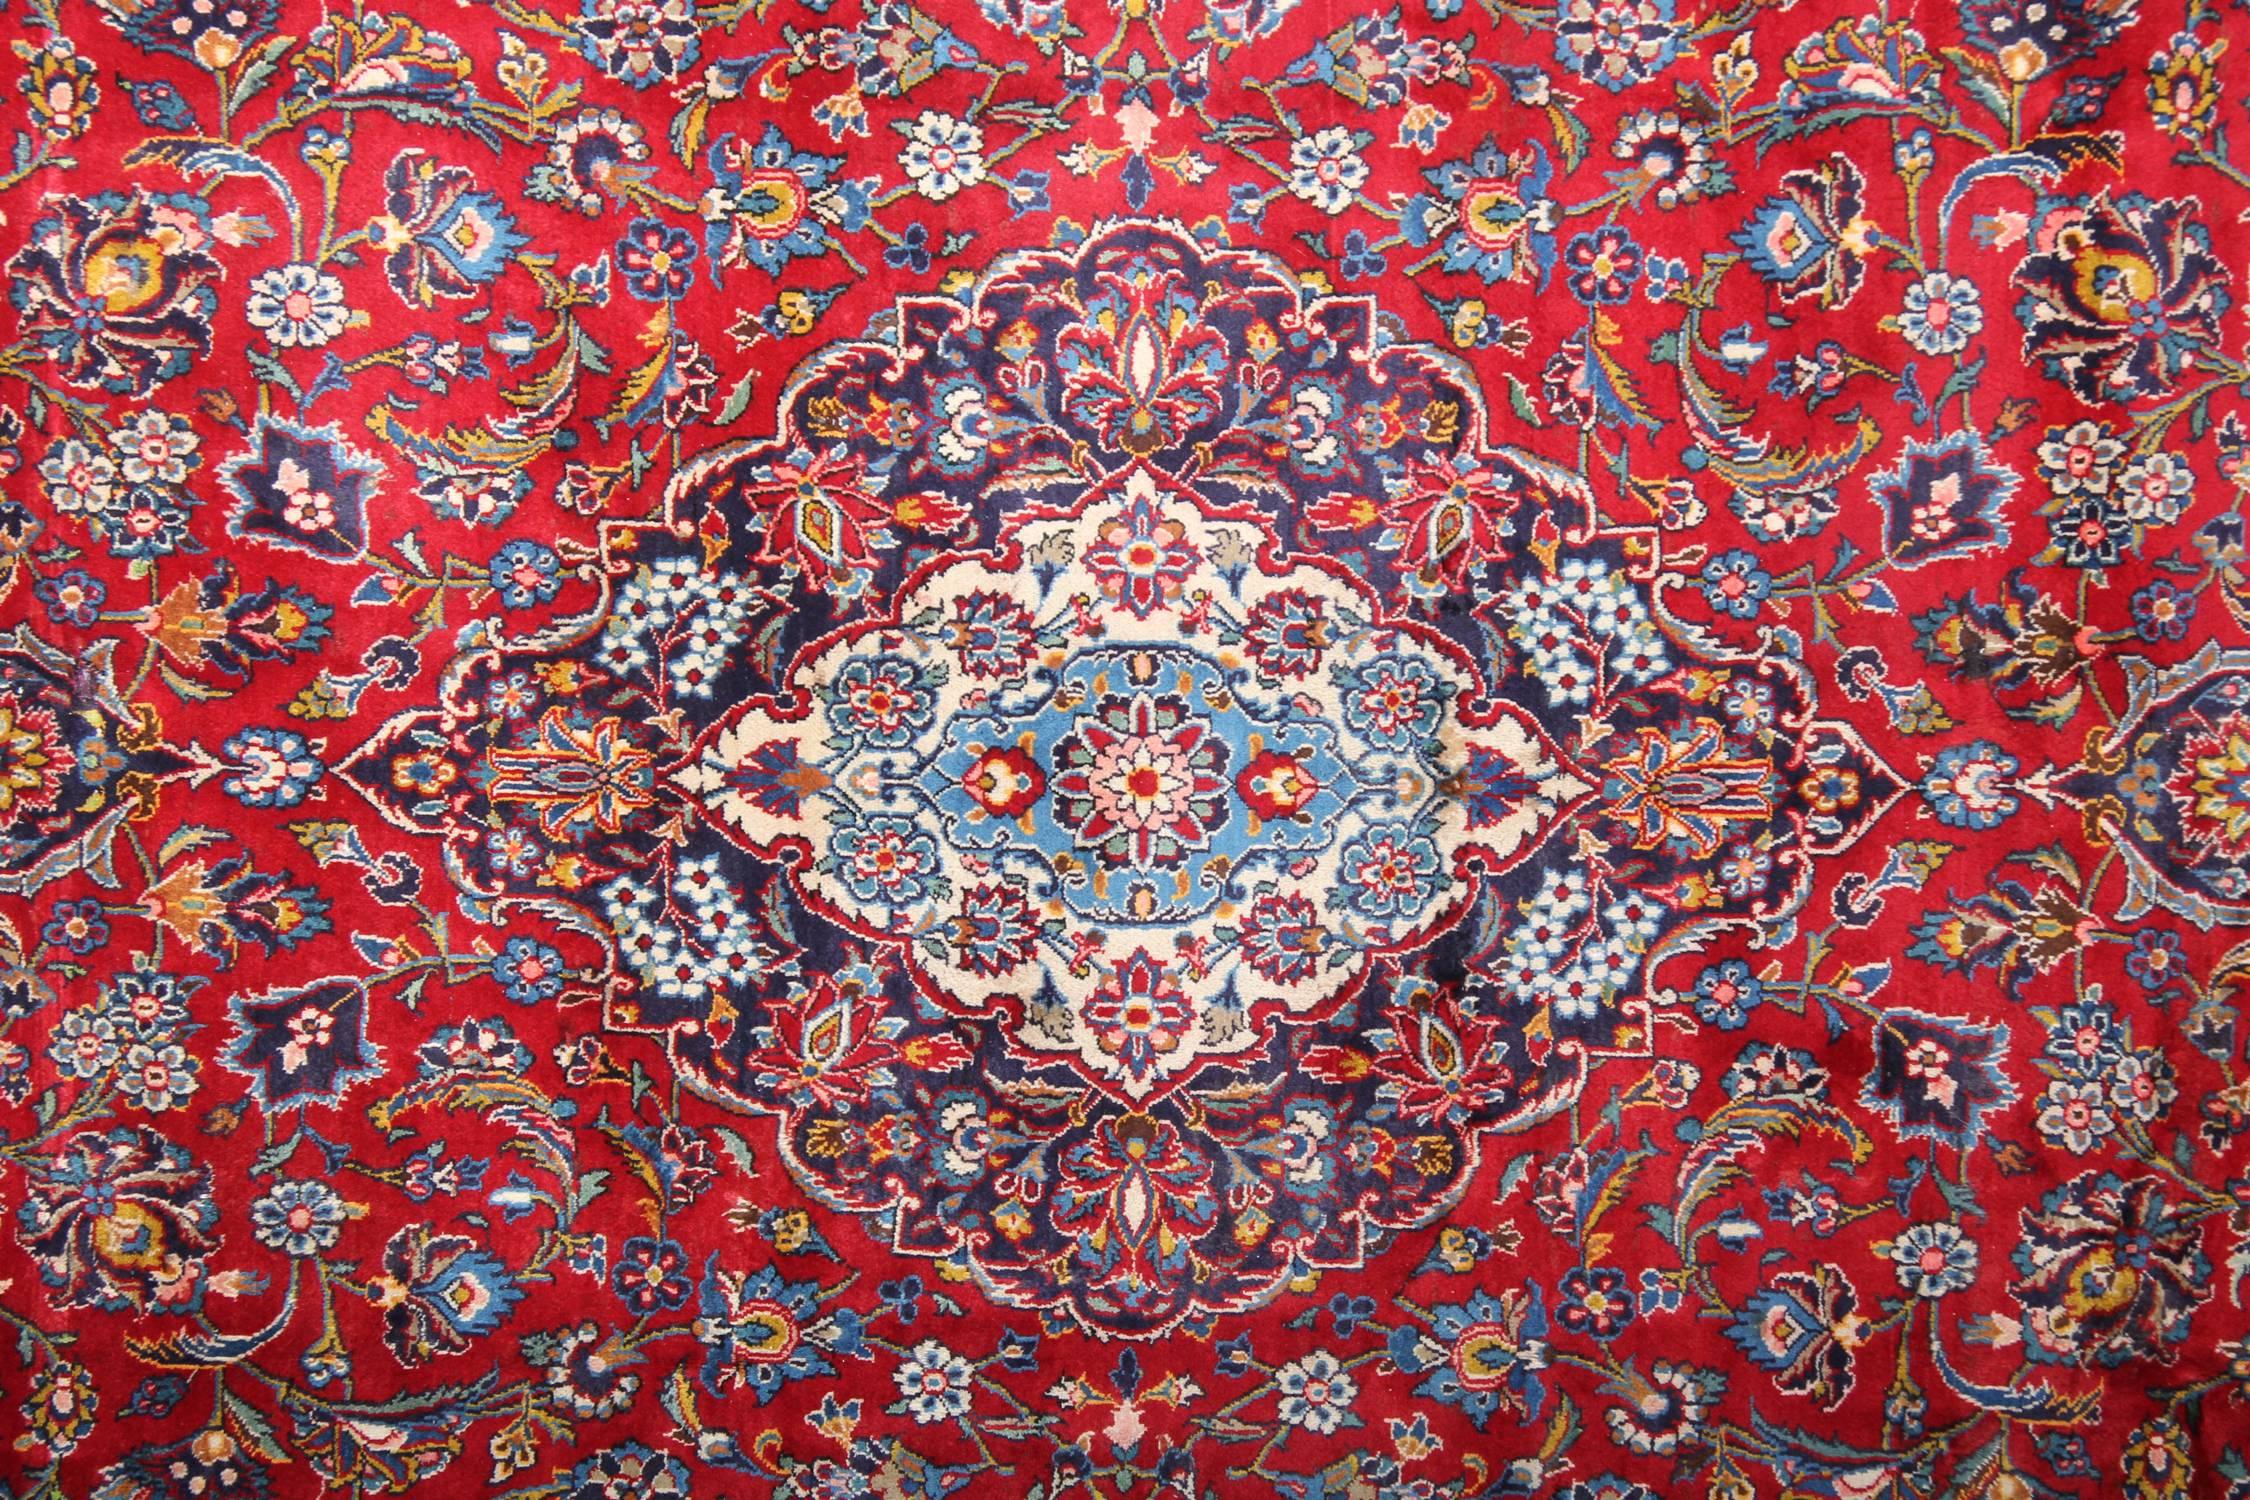 This fantastic wool rug was woven by hand in Turkey in the 1950s and features a traditional medallion design. Woven with a beautiful rich red background with accents of Blue, cream, beige and white that make up the delicate floral medallion and